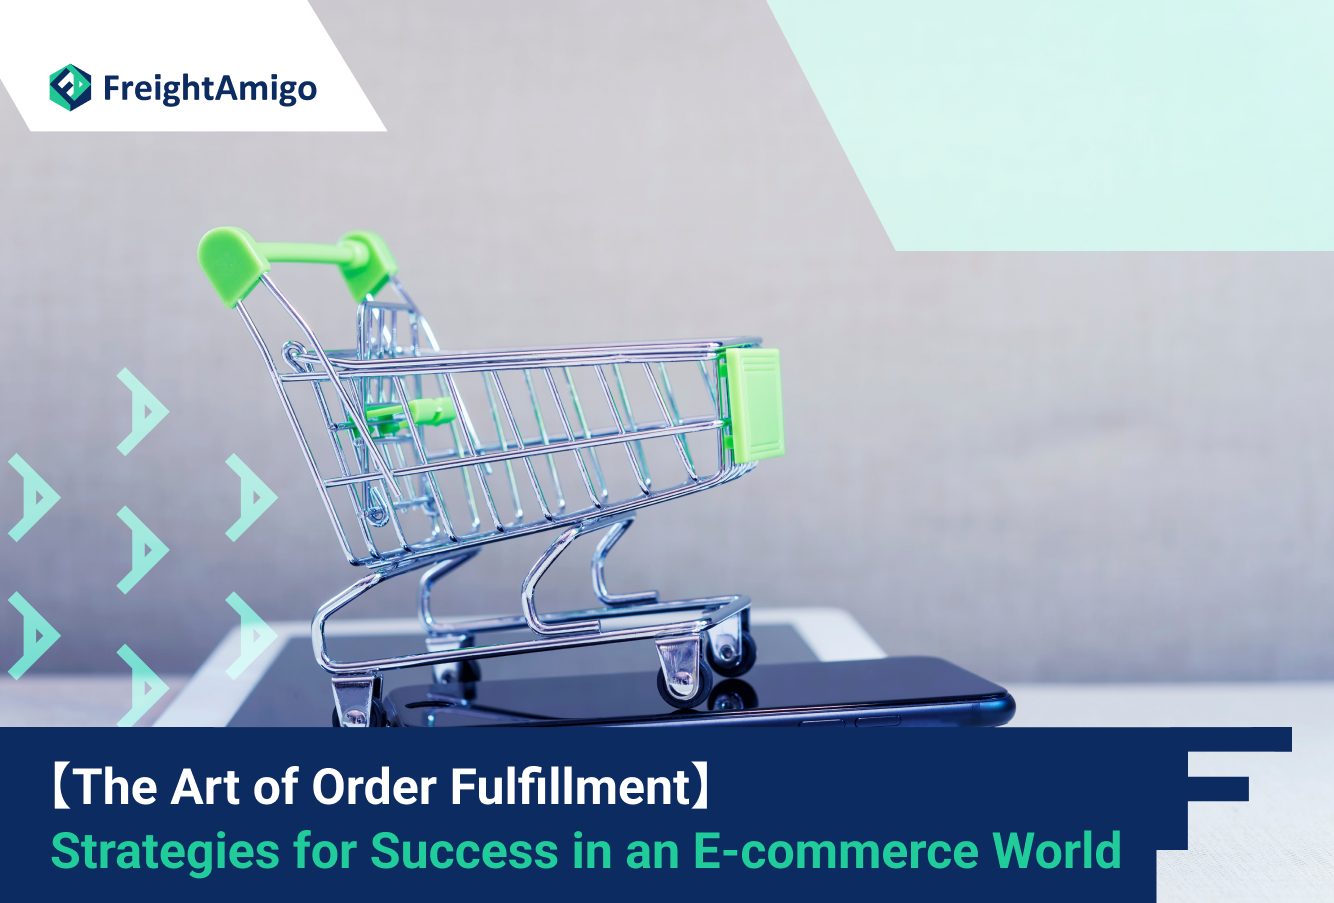 The Art of Order Fulfillment: Strategies for Success in an E-commerce World